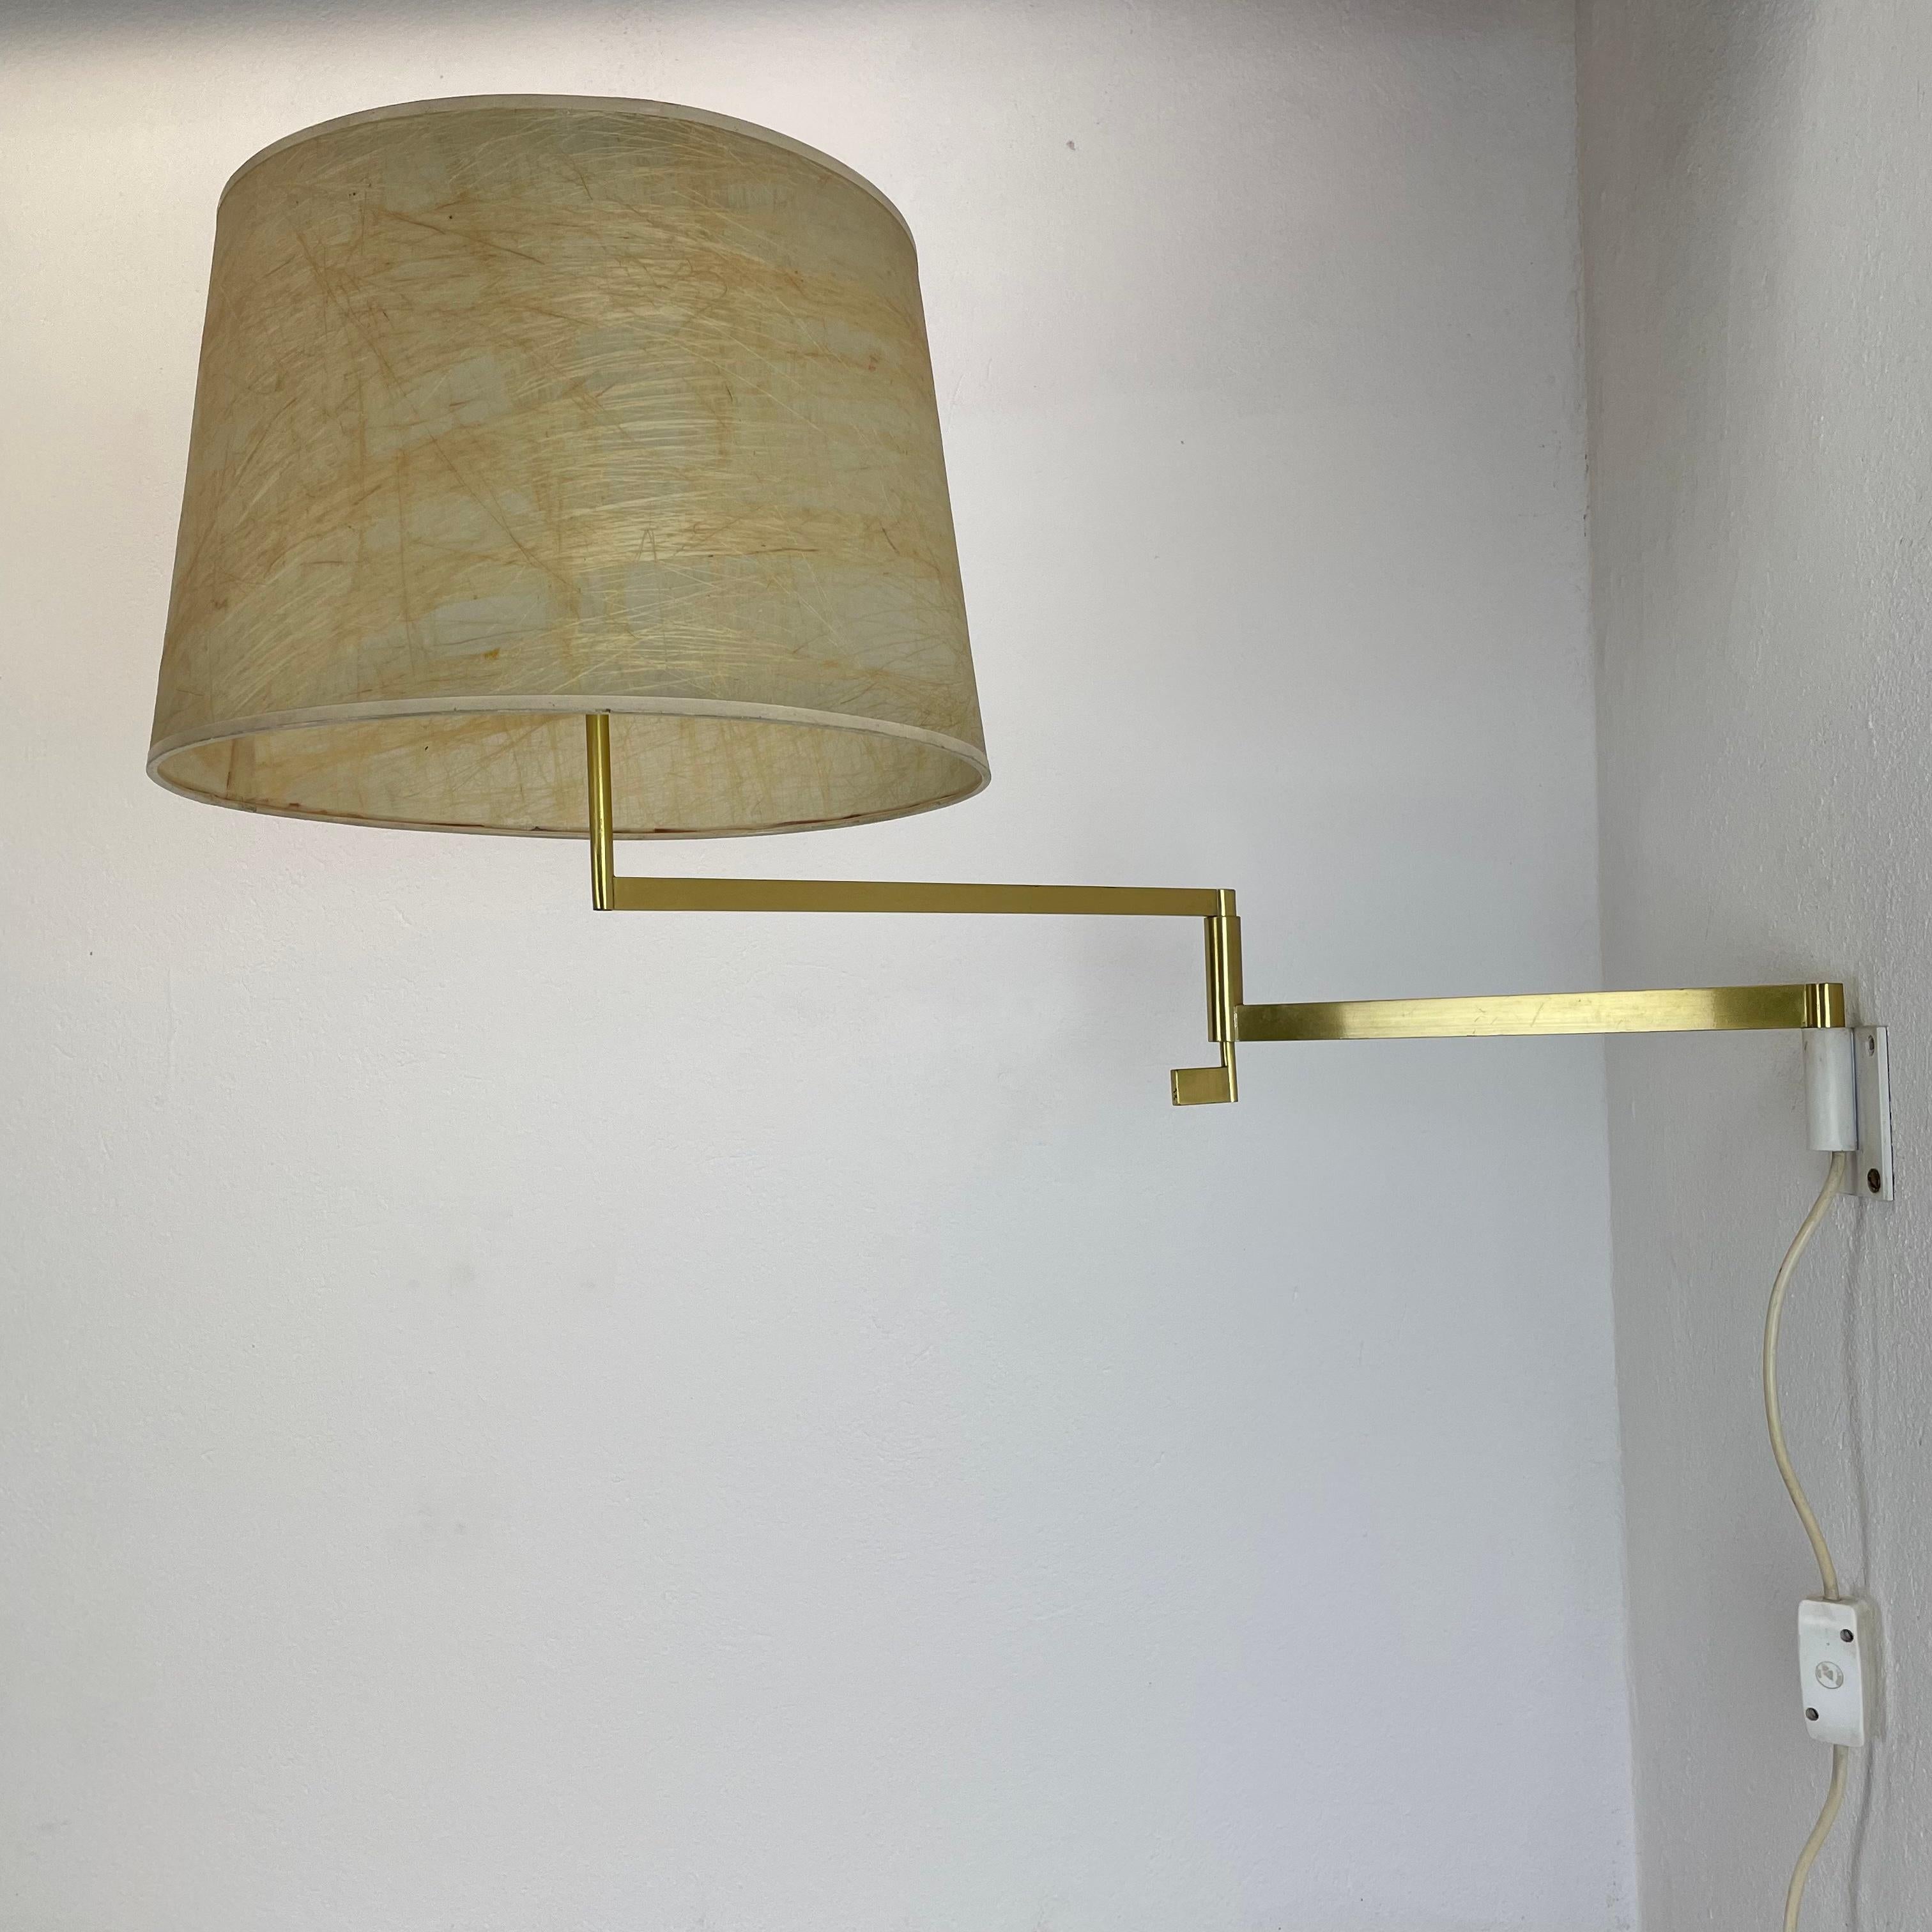 Article:

Wall light xxl with swing arm


Origin:

Italy


Decade:

1960s



This wall light was designed and produced in Italy in the 1960s. The wall fixation of this light and the large light arm with fixation for the shade are